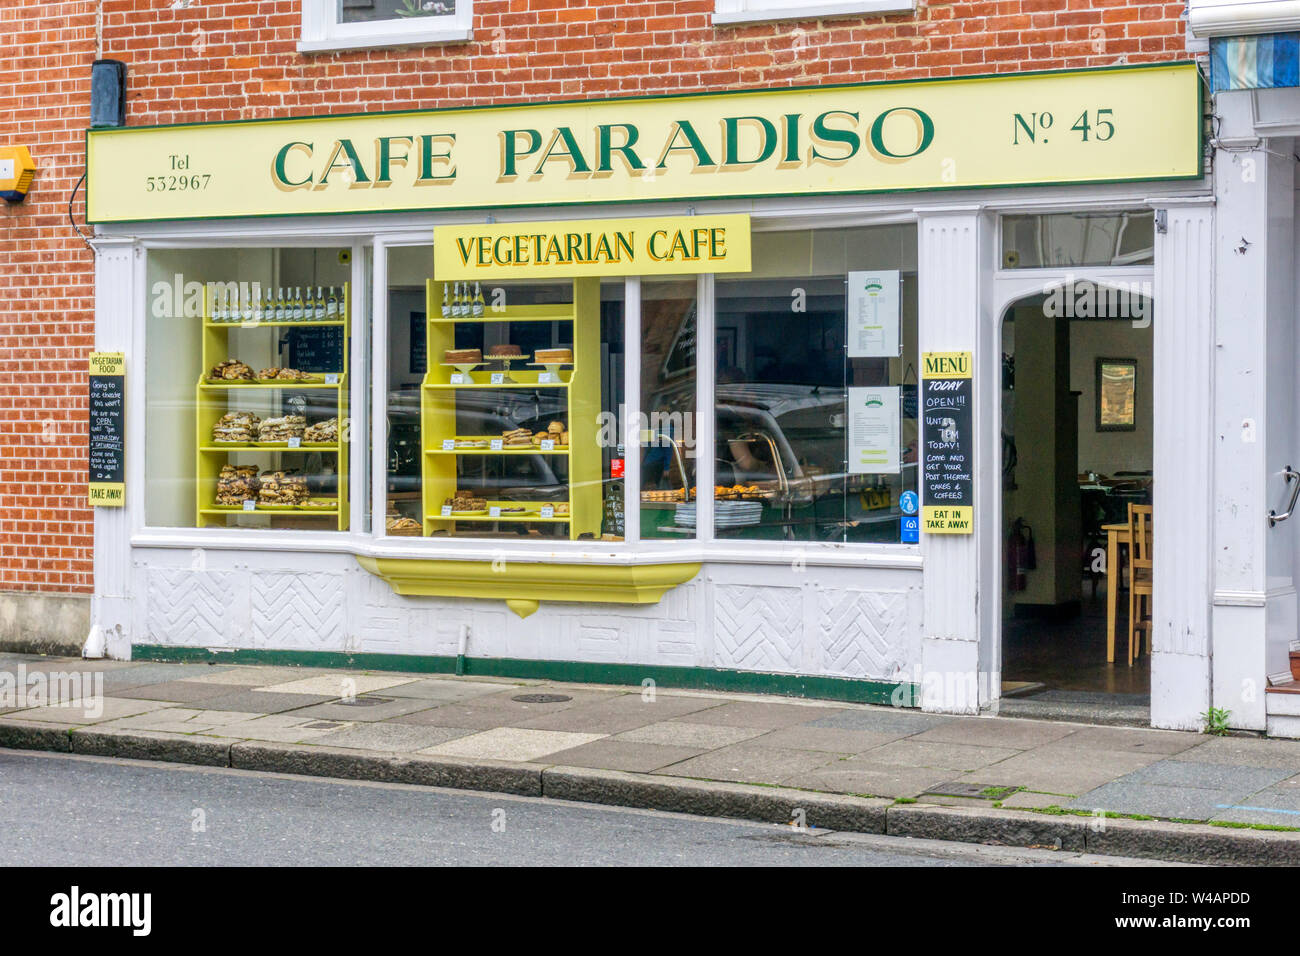 Das Cafe Paradiso Vegetarian Cafe in North Street, Chichester. Stockfoto